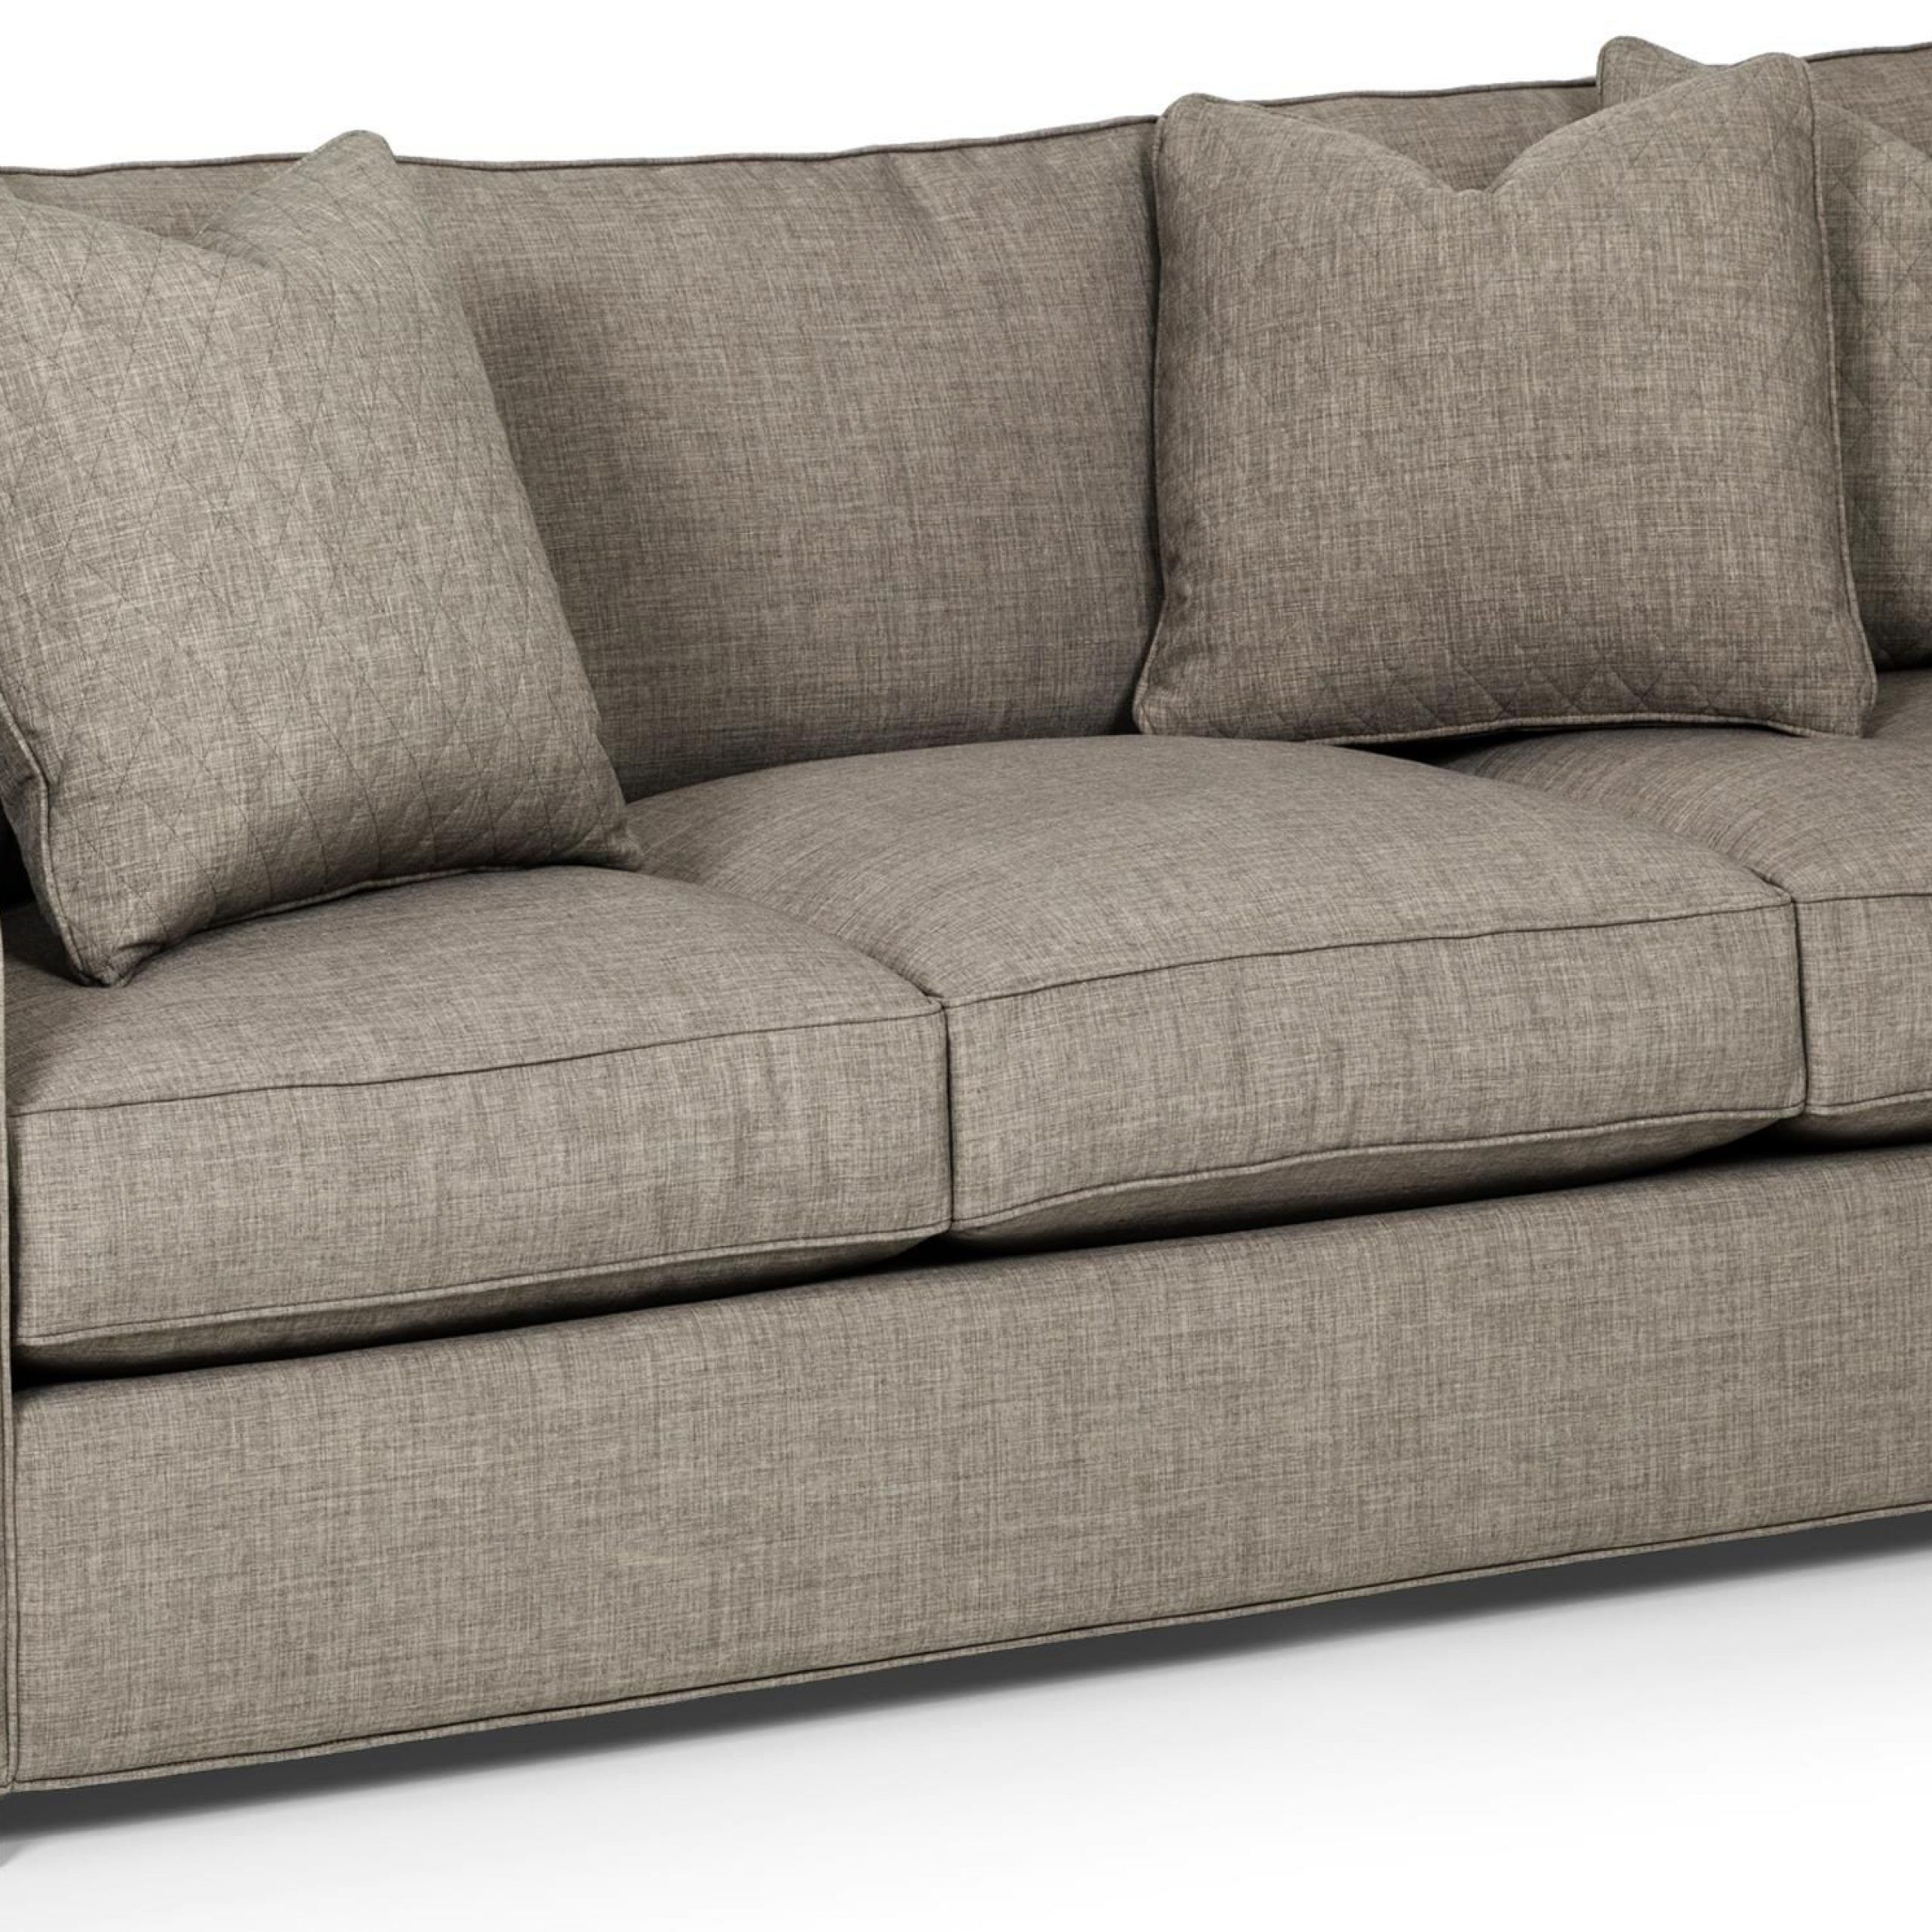 282 Stationary Sofa W/ Loose Pillow Backsunset Home At Inside Lyvia Pillowback Sofa Sectional Sofas (View 12 of 15)